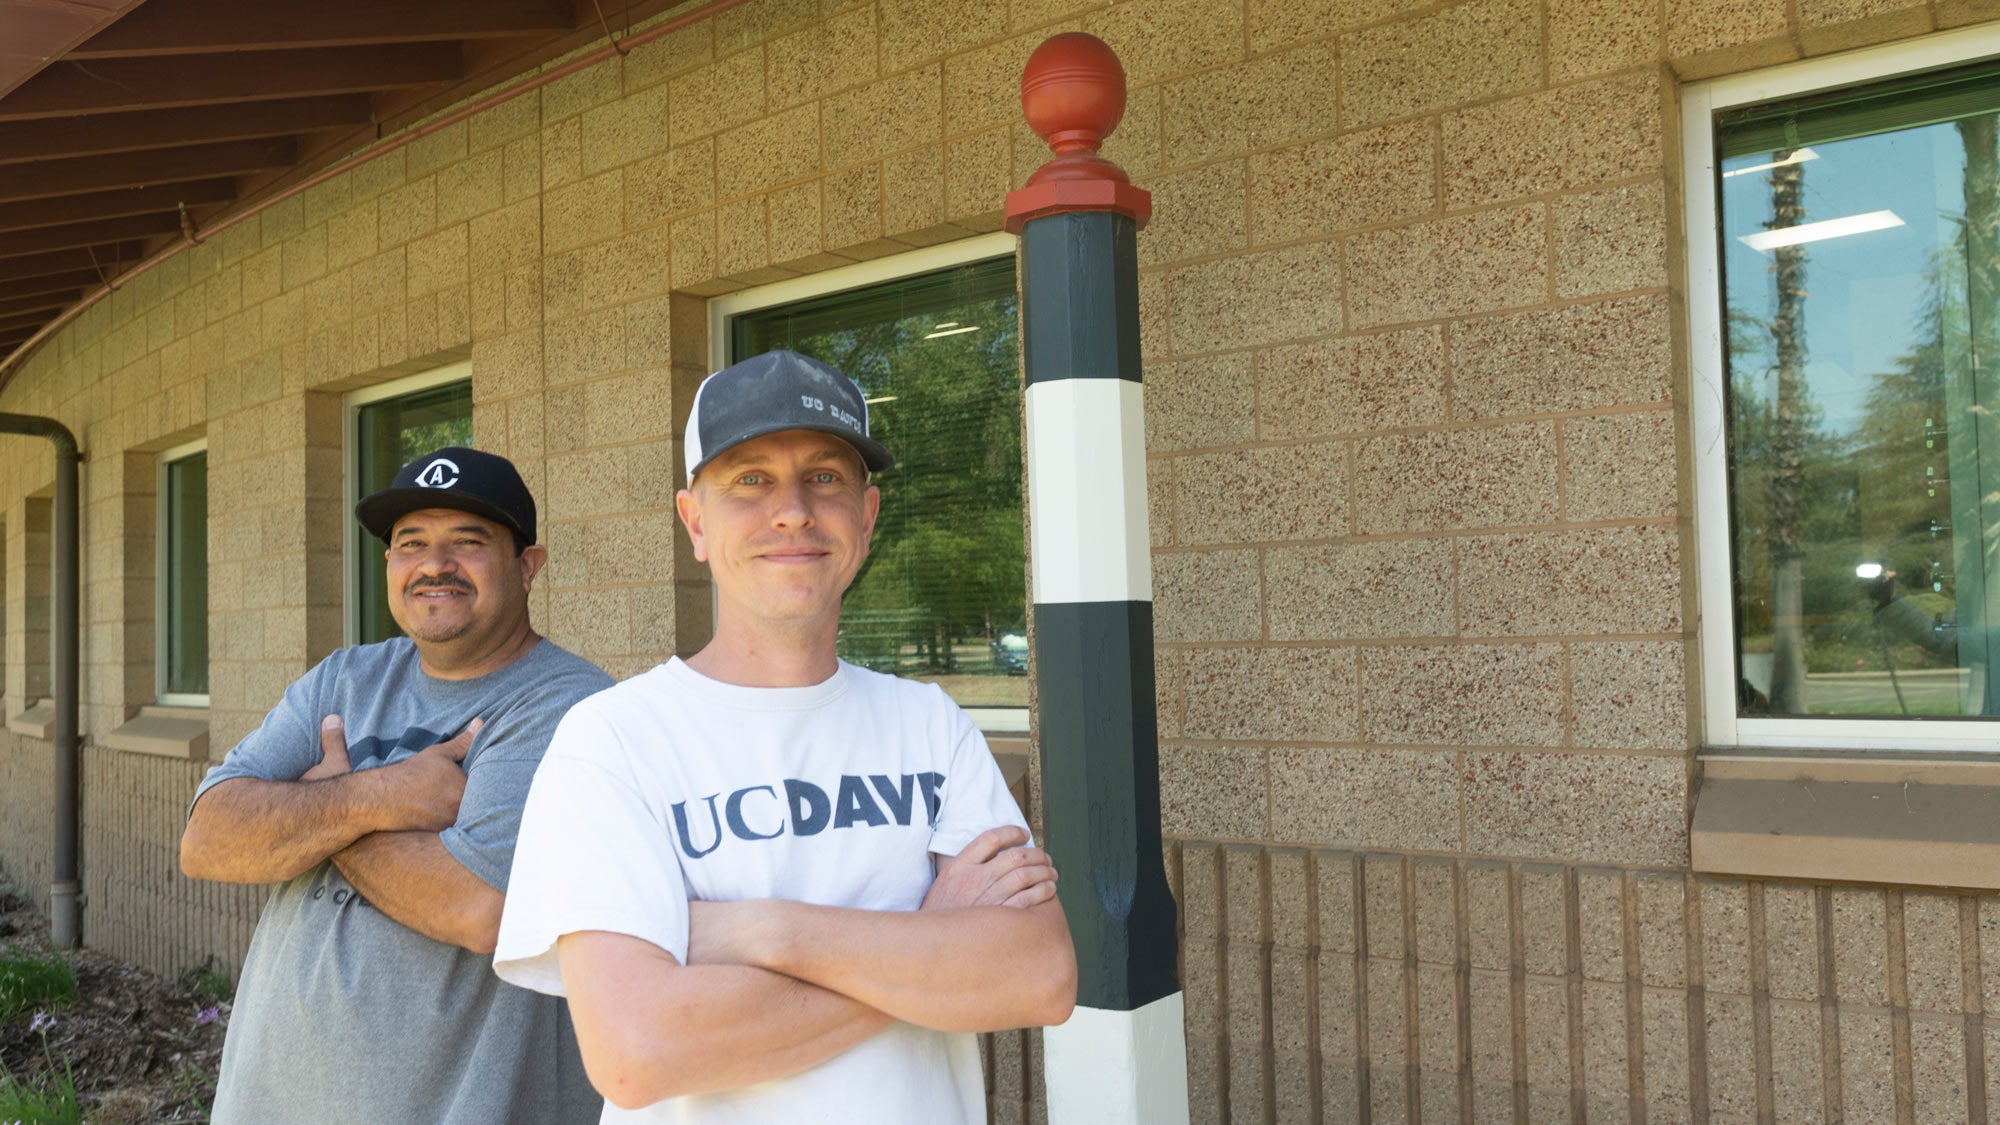 Two men from campus Paint Shop, posing in front of racetrack distance pole.